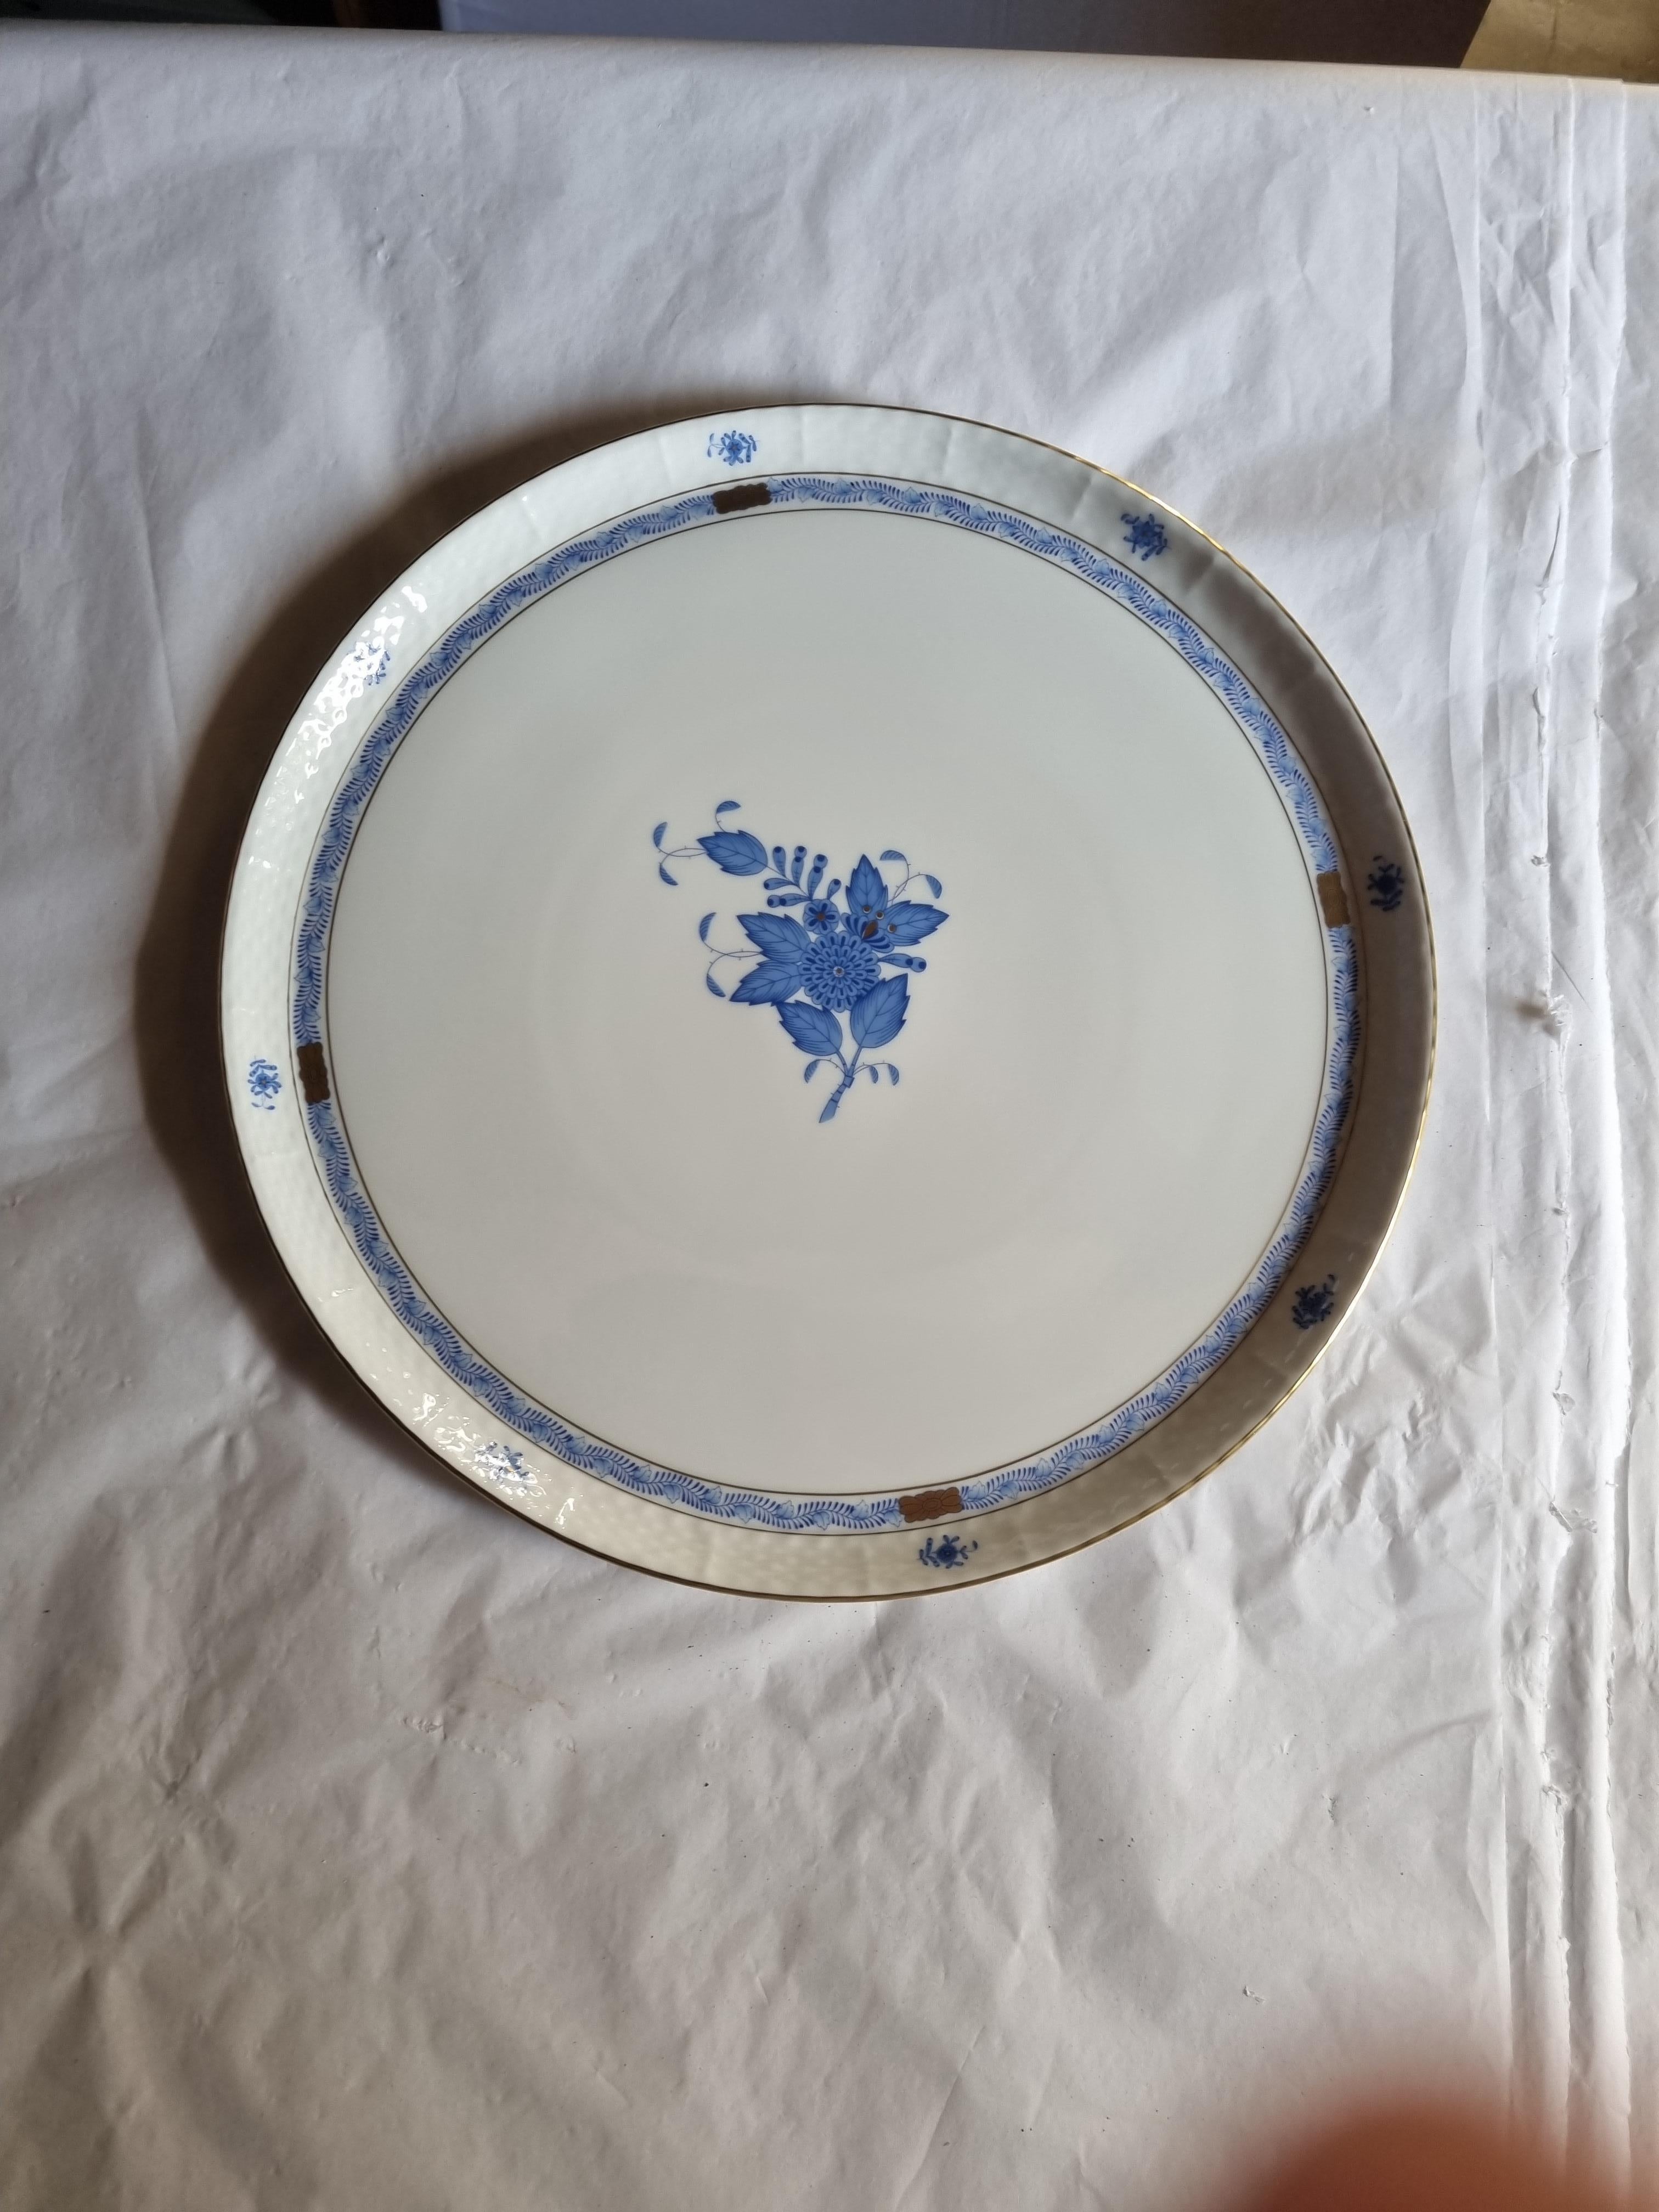 Herend Fine Porcelain Setting Piece set large round platter and 6 serving dish which could be used seperately or as a set.  Perfect for appetizers or dips!
Proposed in the blue variant of the famous Apponyi decoration.

The Herend Porcelain